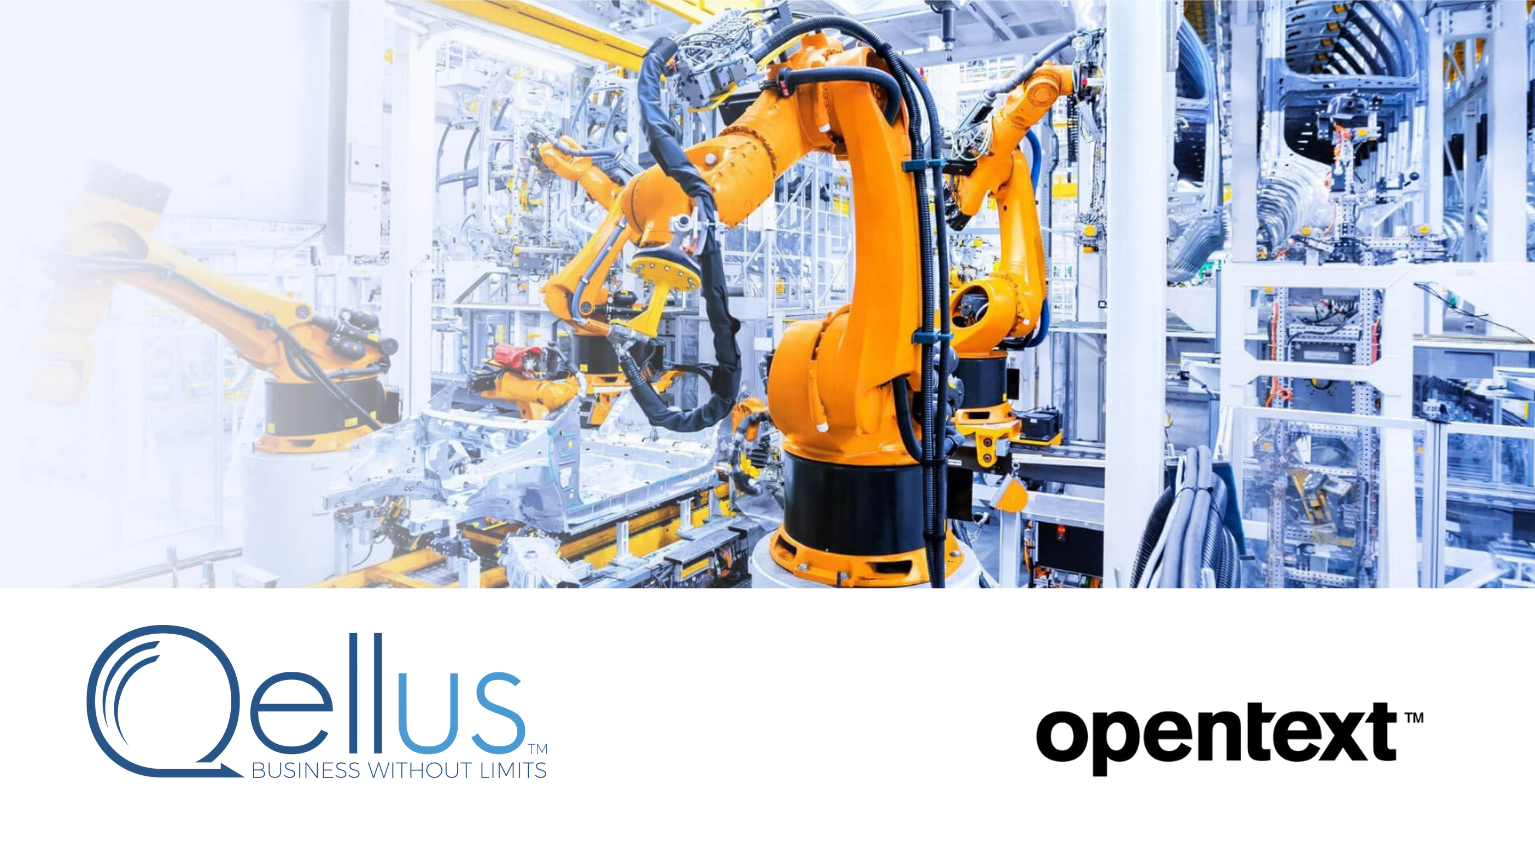 OpenText and Qellus are hosting a Maximo document management webinar!